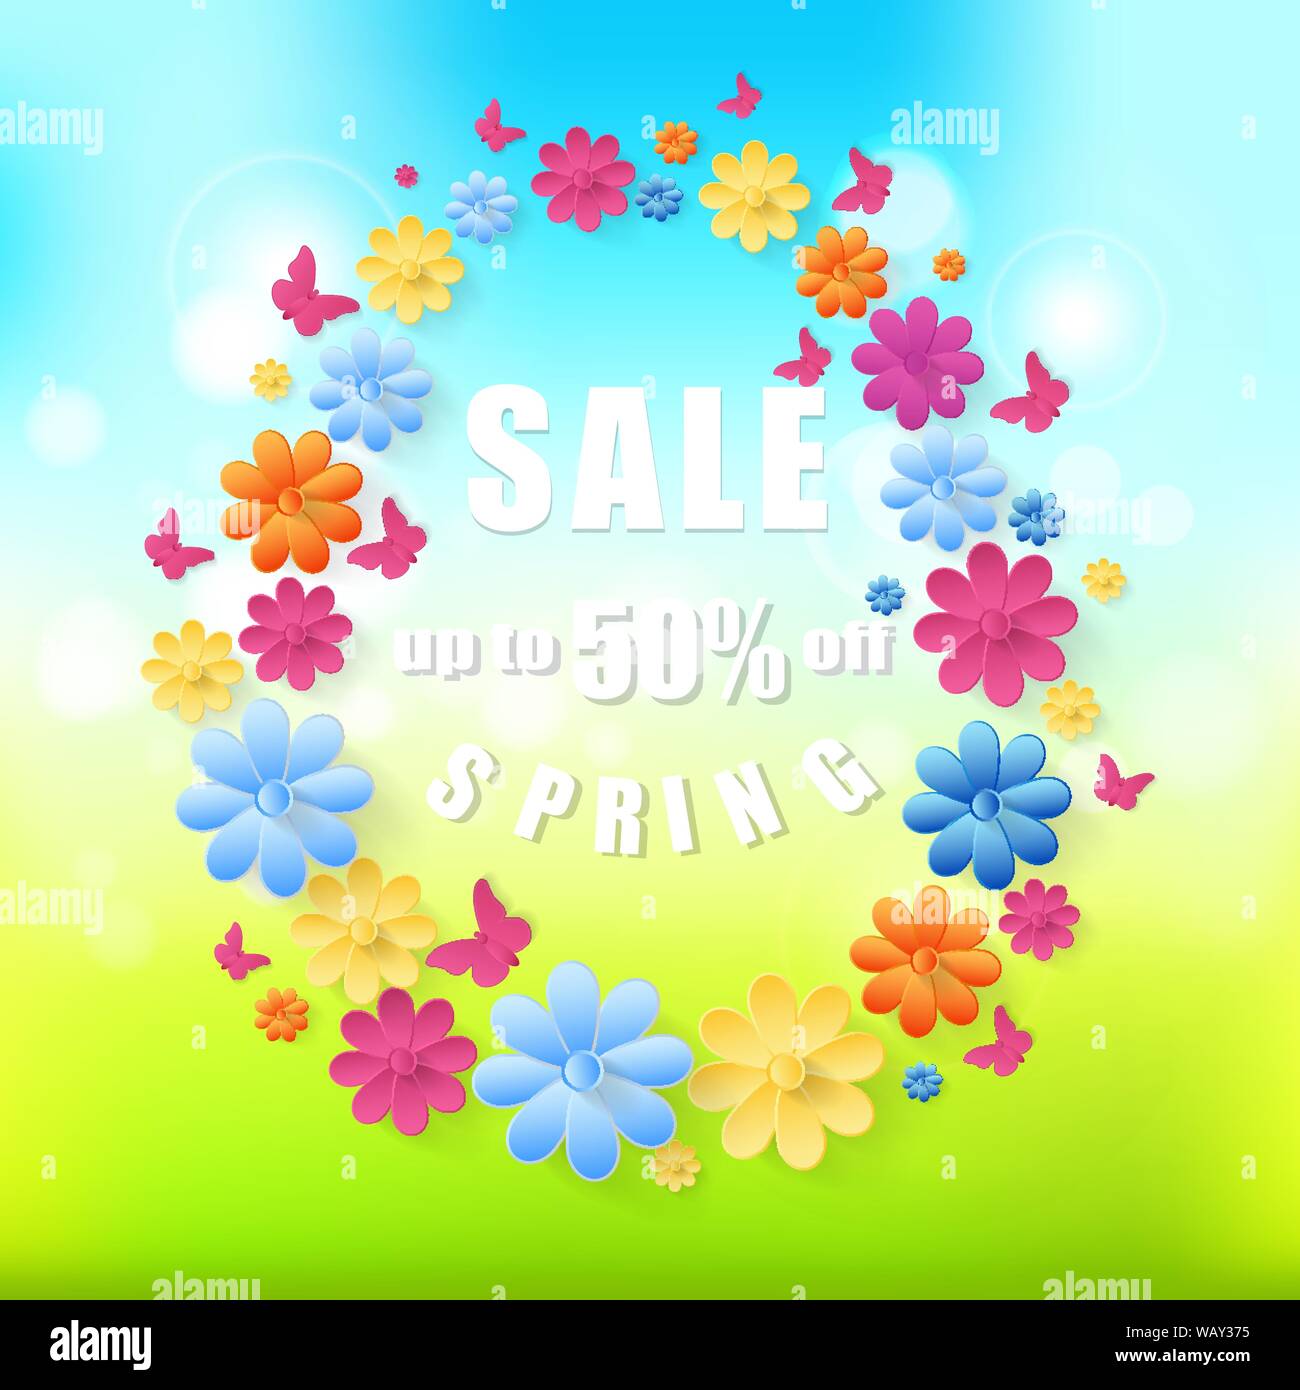 Spring sale background Vector eps10 Stock Vector